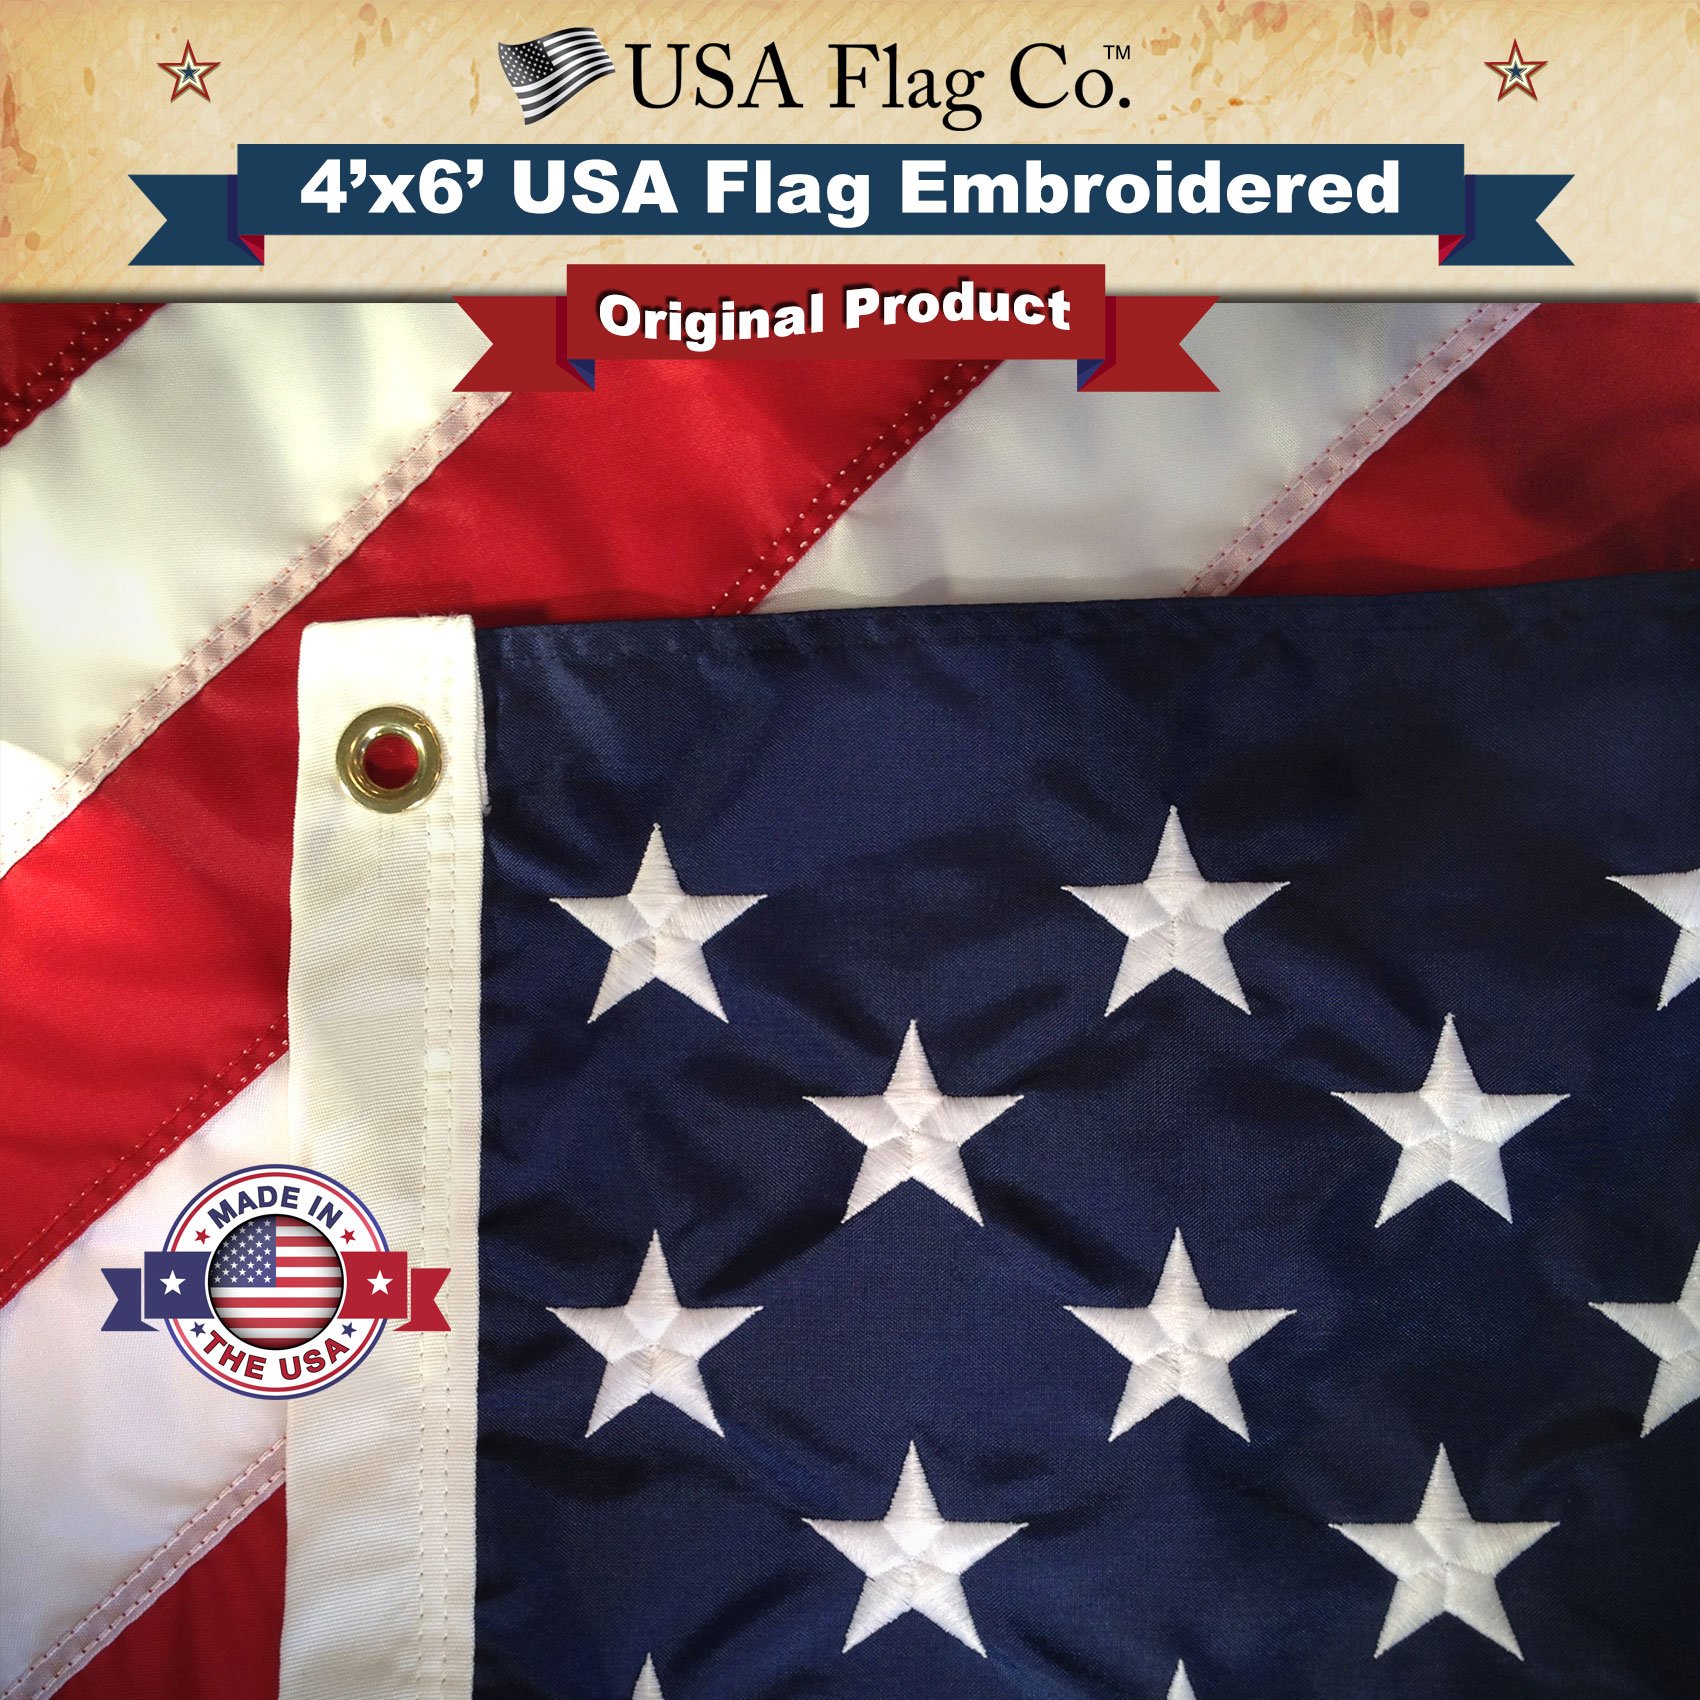 USA Flag Co Us Flag 4X6 By Usa Flag Co Is 100 American Made: The Best Embroidered Stars And Sewn Stripes American Flags, Made In The Usa, Wi